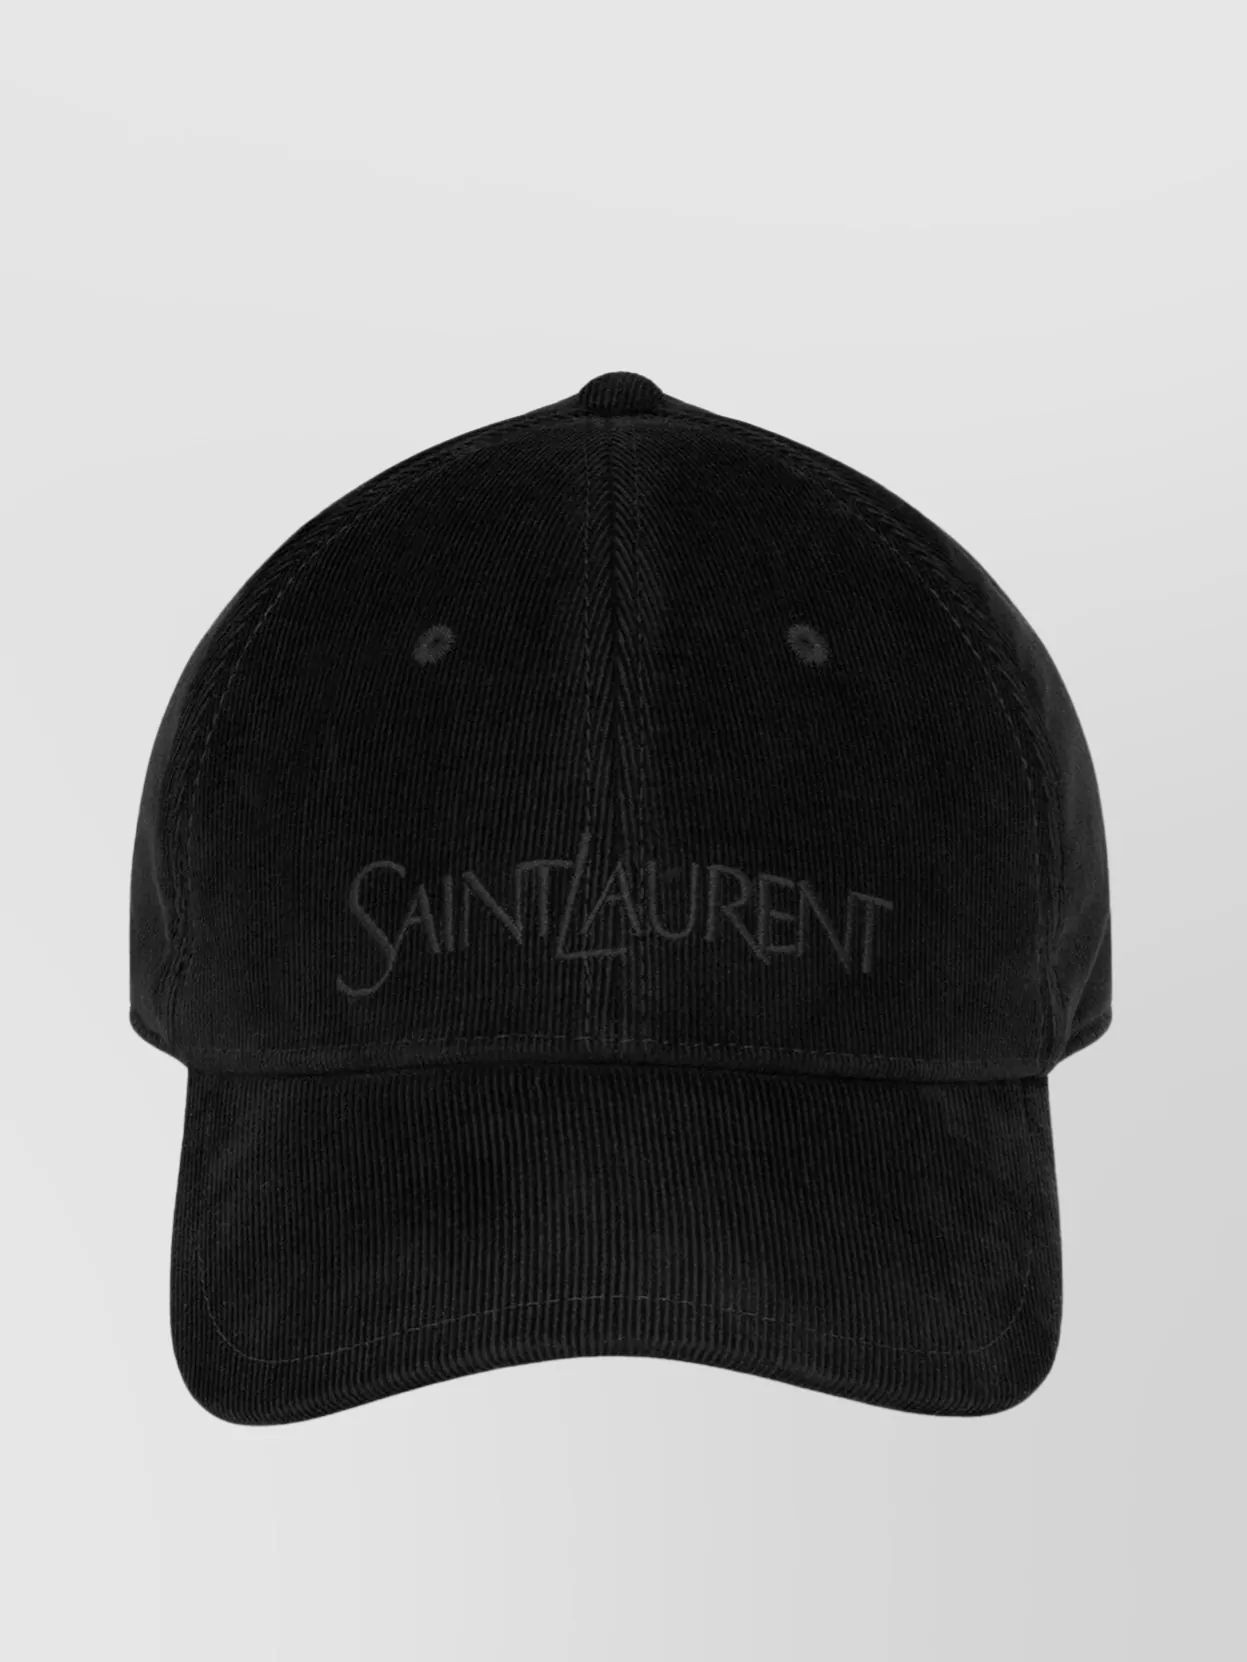 Saint Laurent Embroidered Vintage Cap With Curved Brim In Black